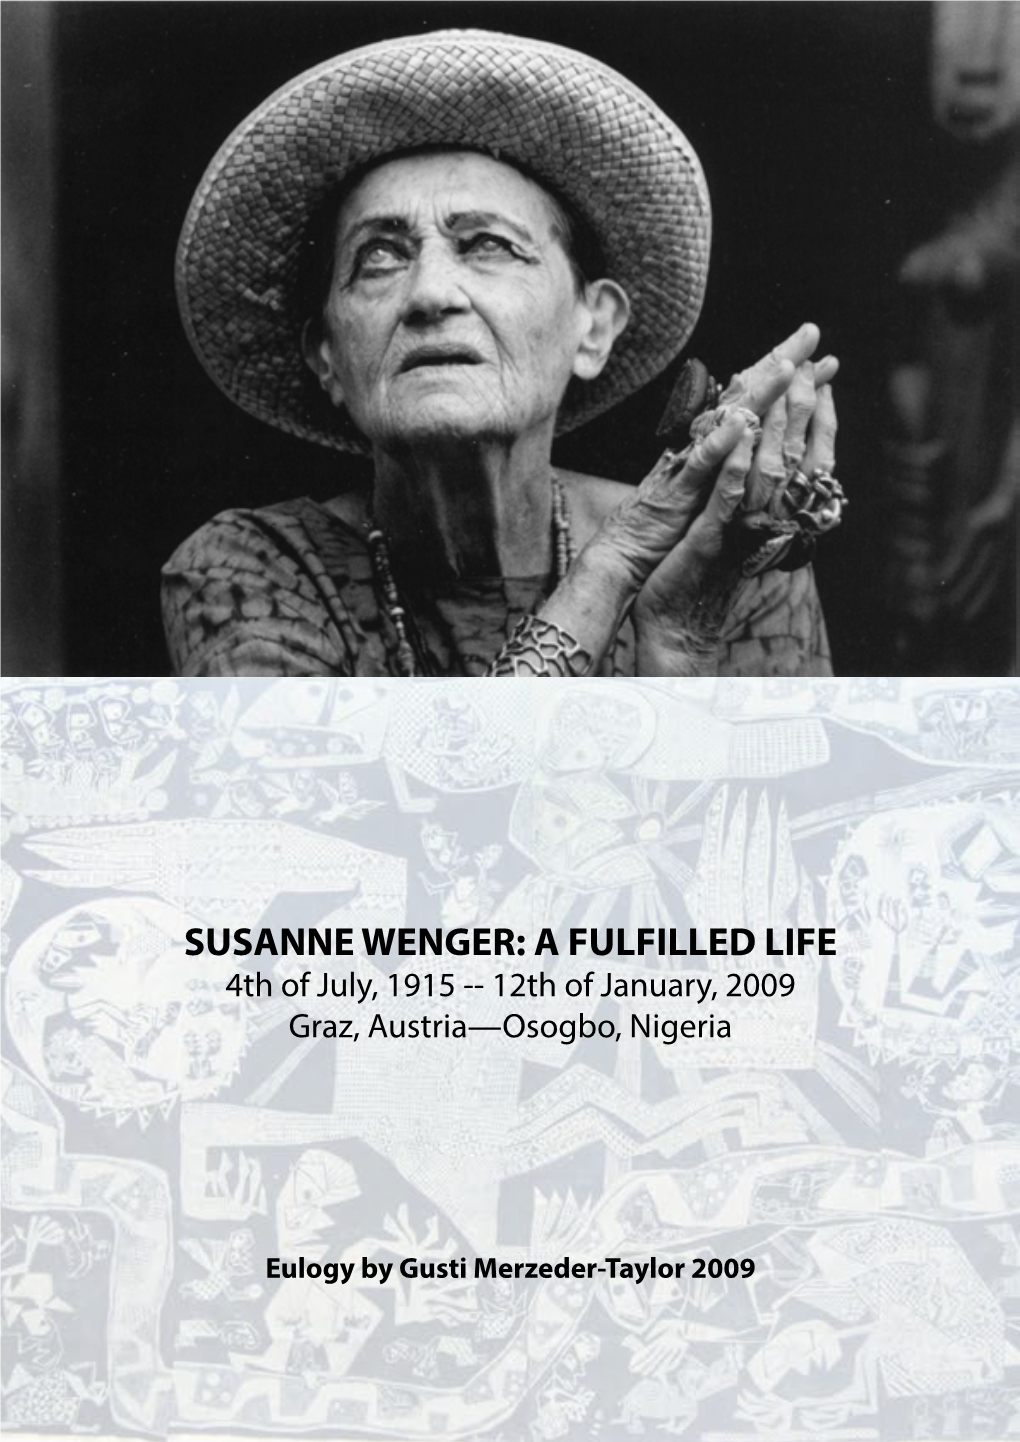 SUSANNE WENGER: a FULFILLED LIFE 4Th of July, 1915 -- 12Th of January, 2009 Graz, Austria—Osogbo, Nigeria